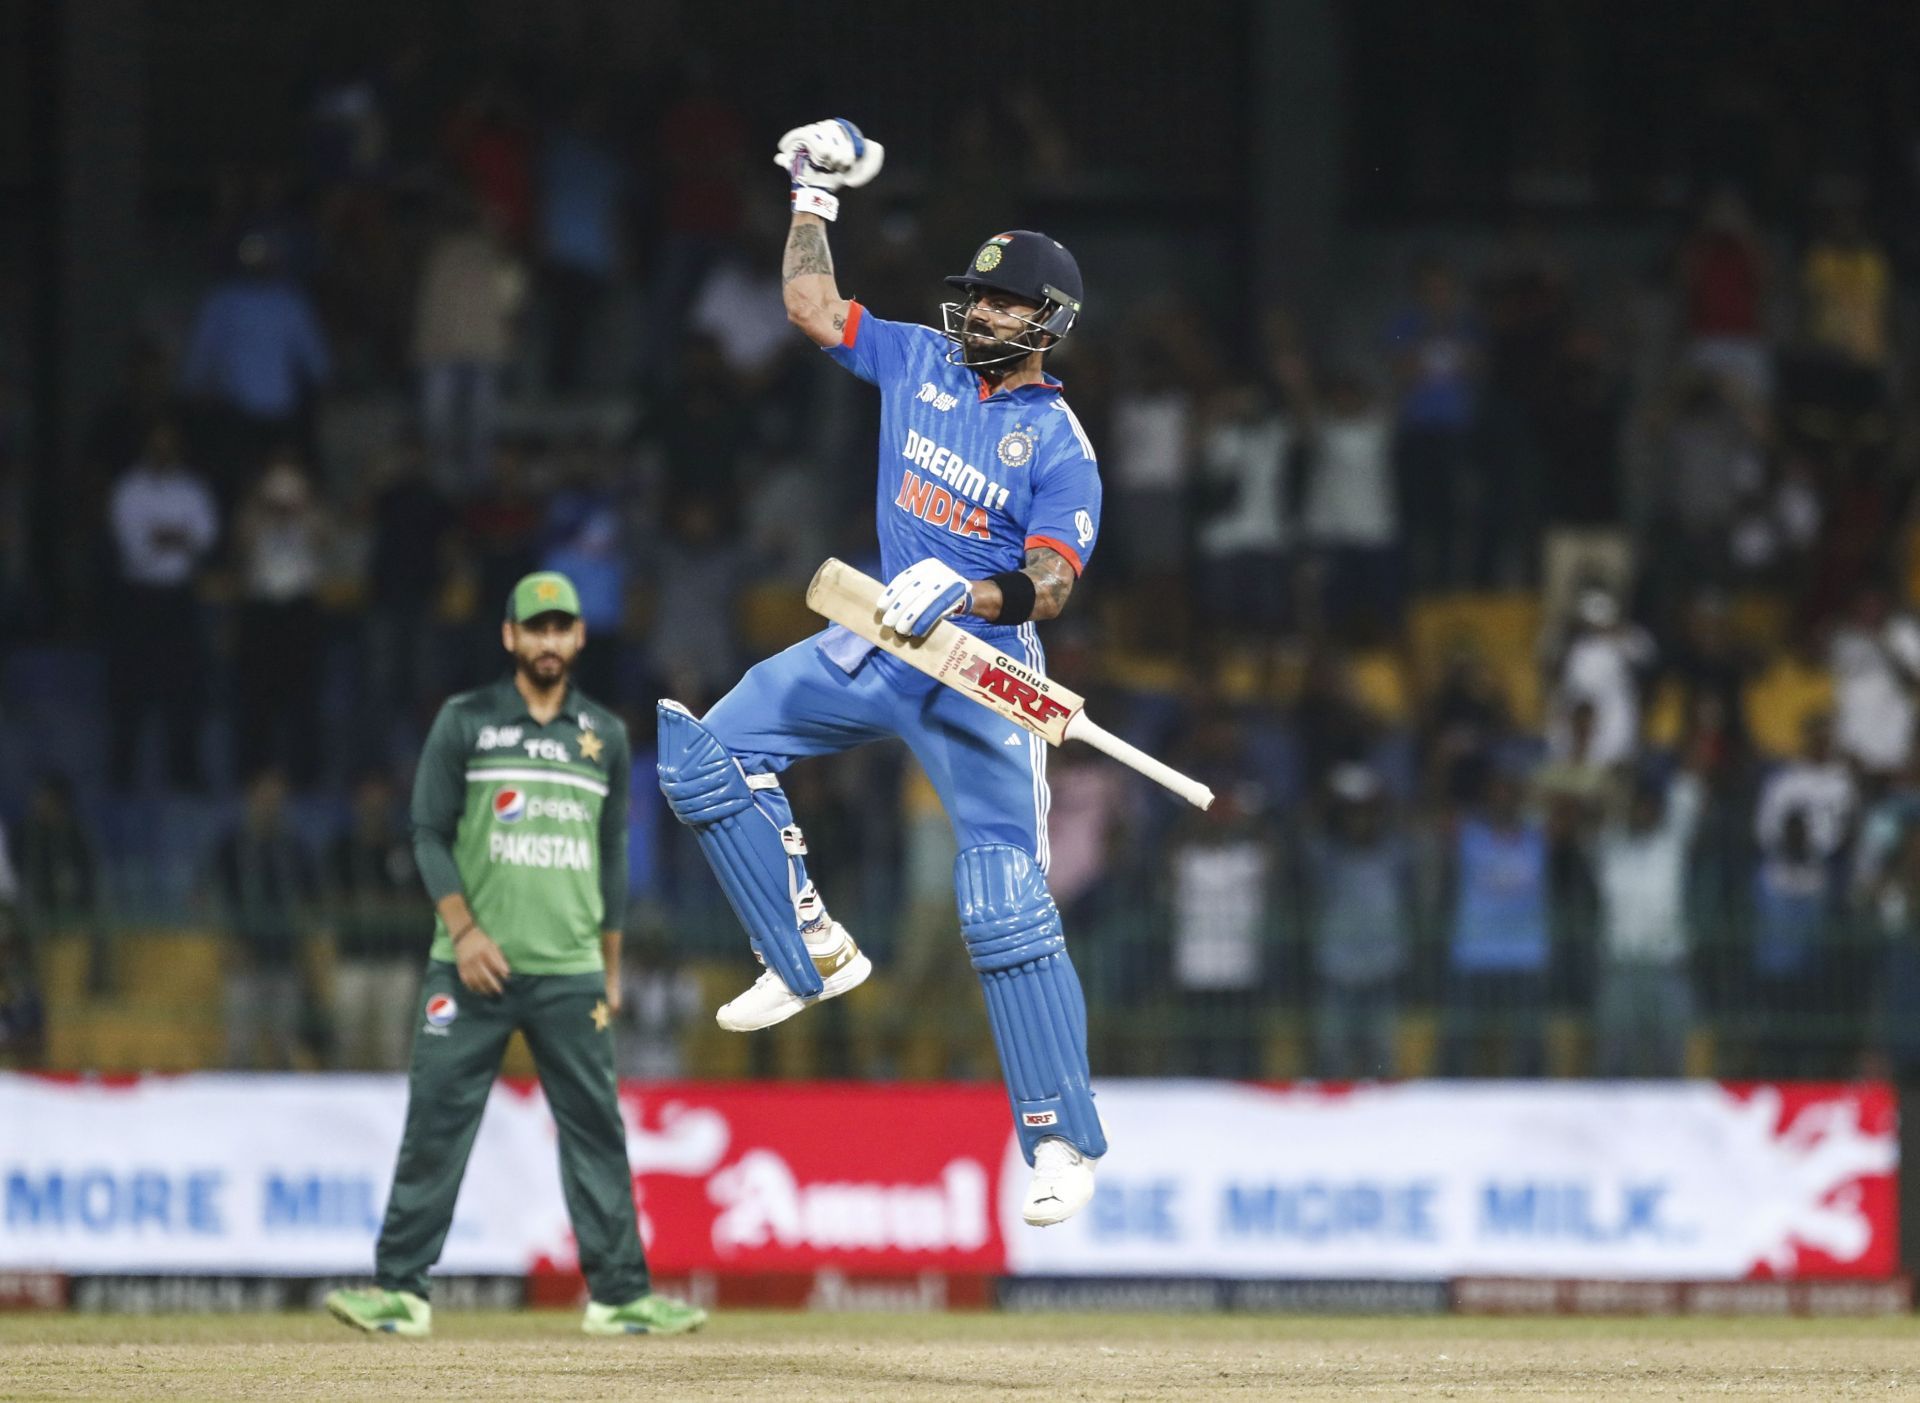 Virat Kohli celebrating his fifth Asia Cup hundred [Getty Images]